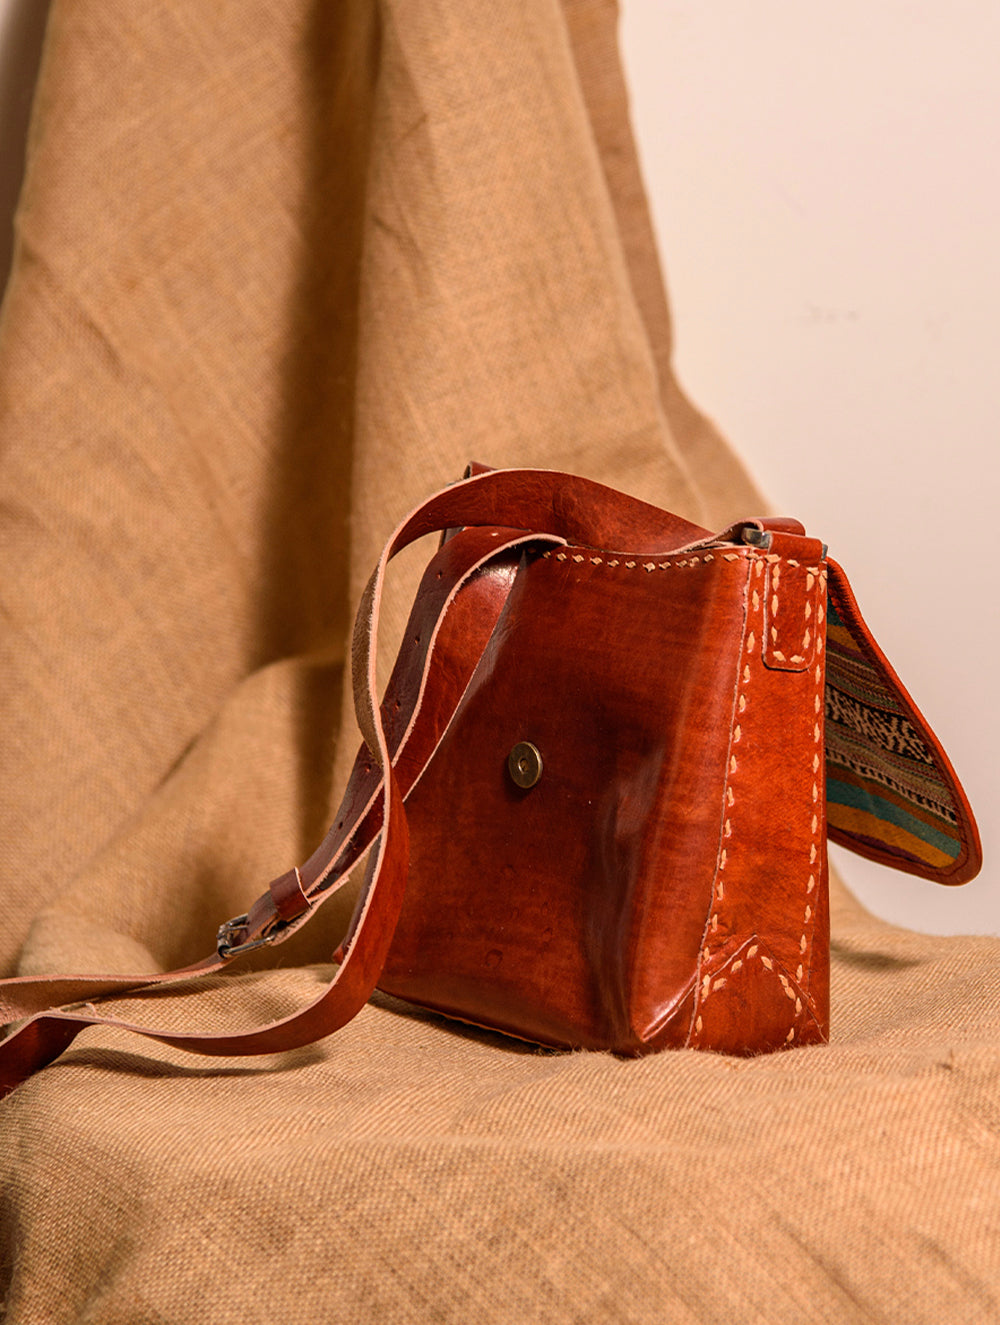 Load image into Gallery viewer, Handcrafted Jawaja Leather Bag with Cloth Woven Patch